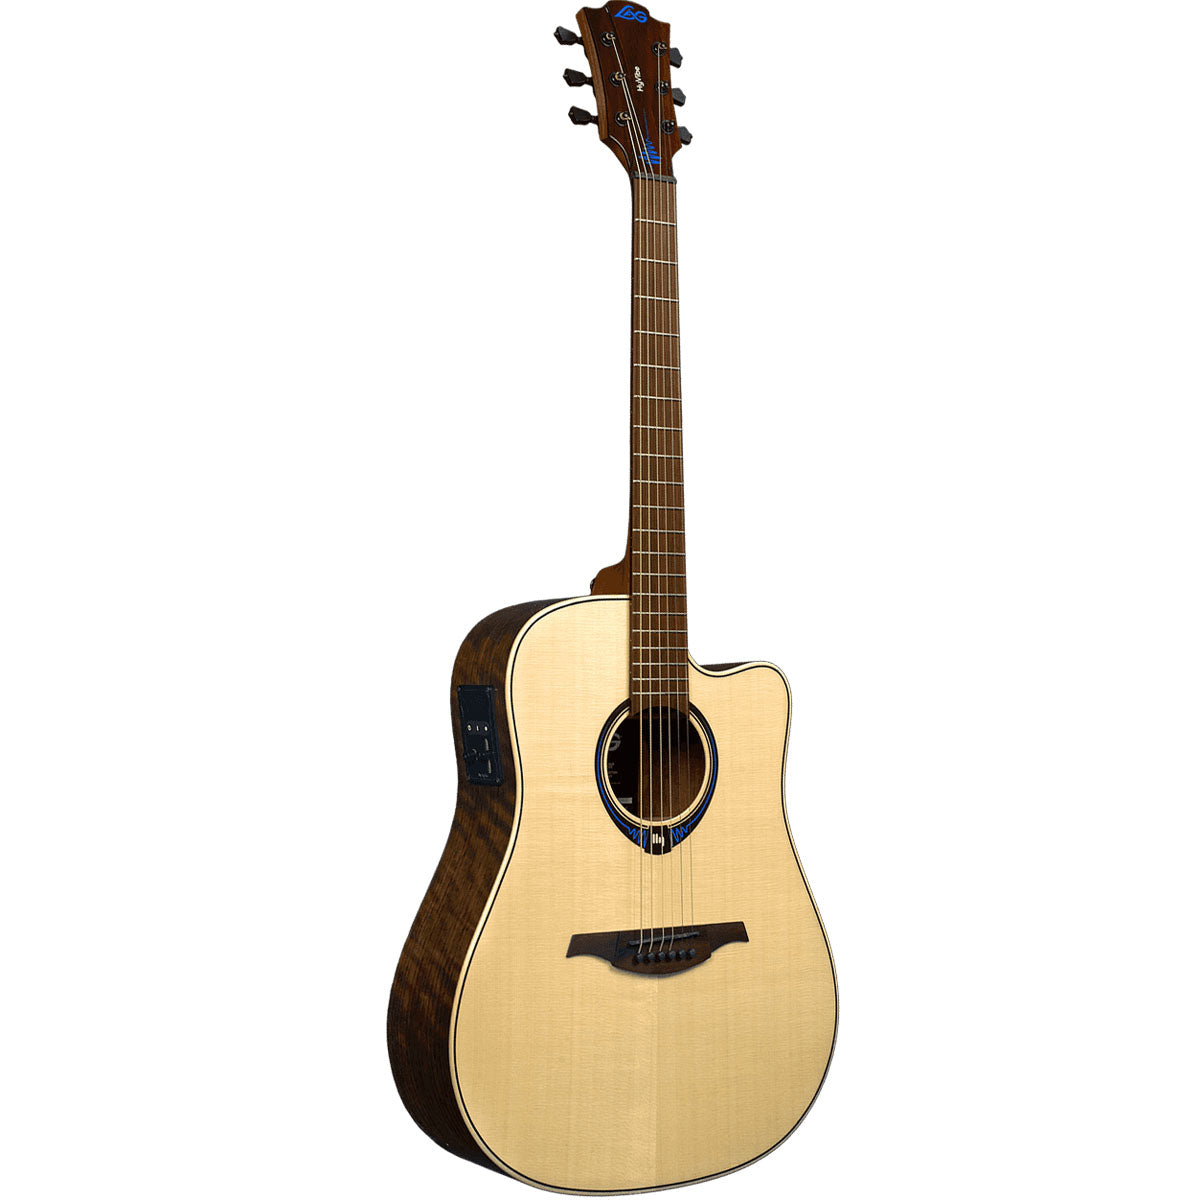 Lag Tramontane Hyvibe 20 THV20DCE Acoustic Guitar Dreadnought Solid Engelmann Top w/ Pickup & Case